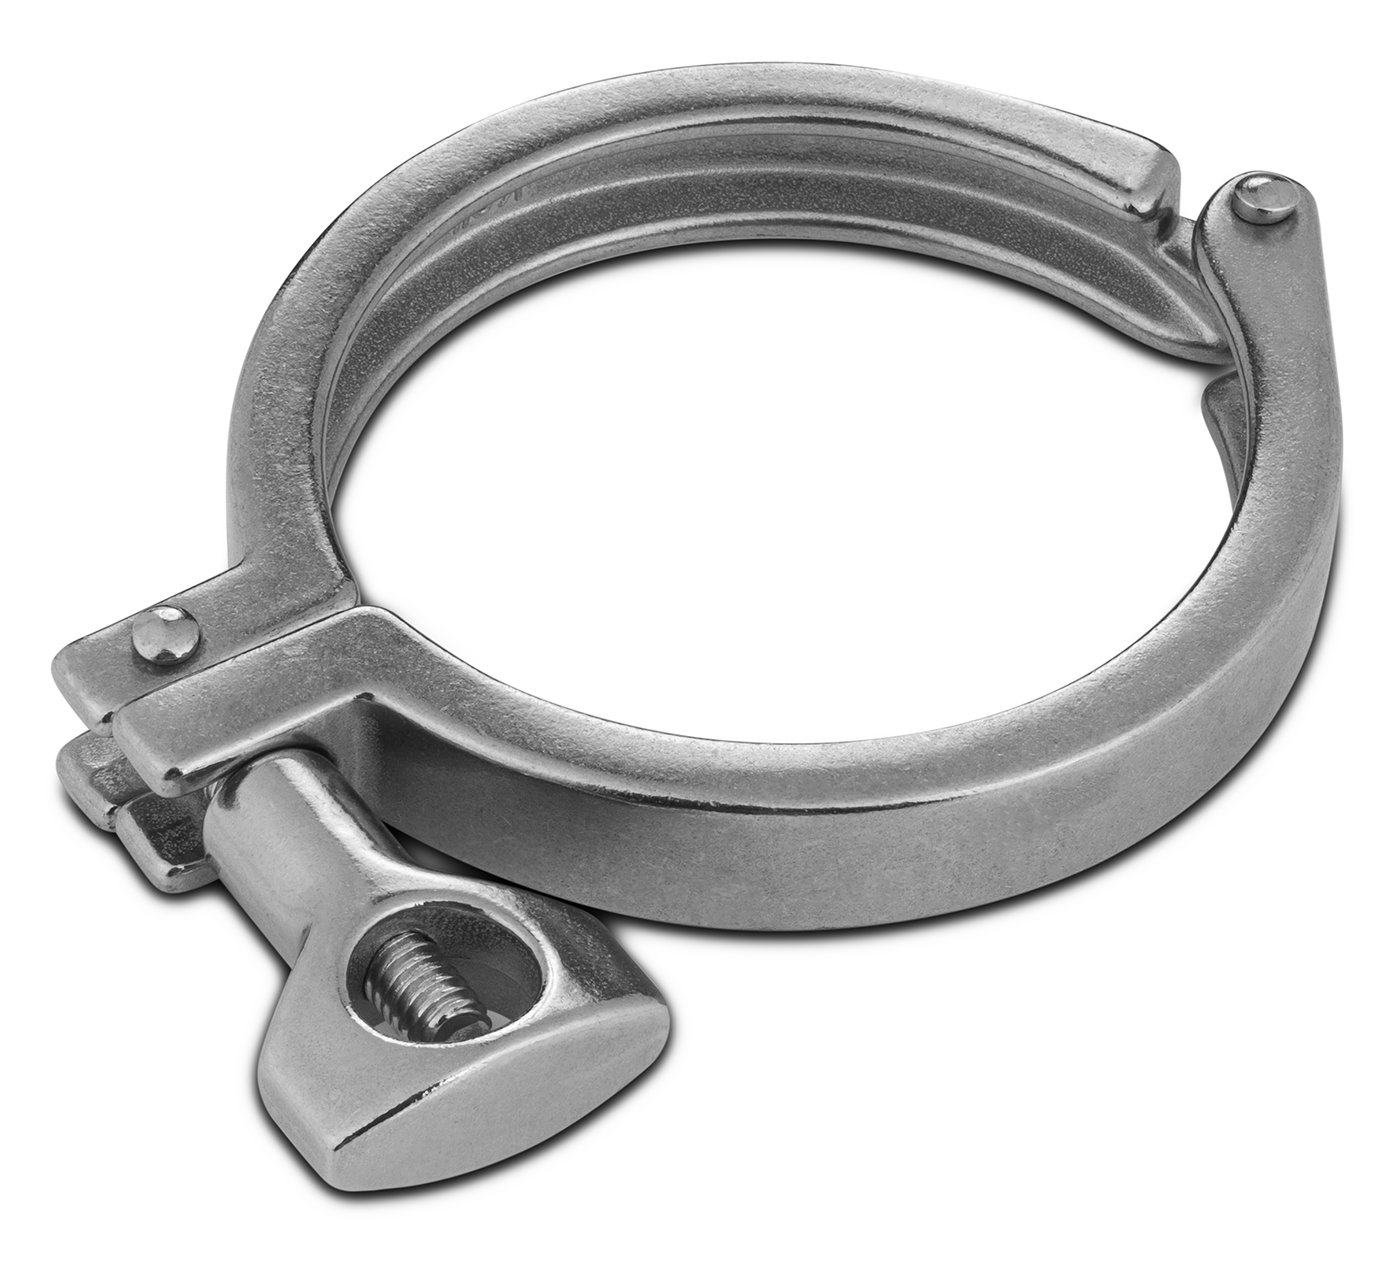 What is the PSI rating on this tri-clamp?